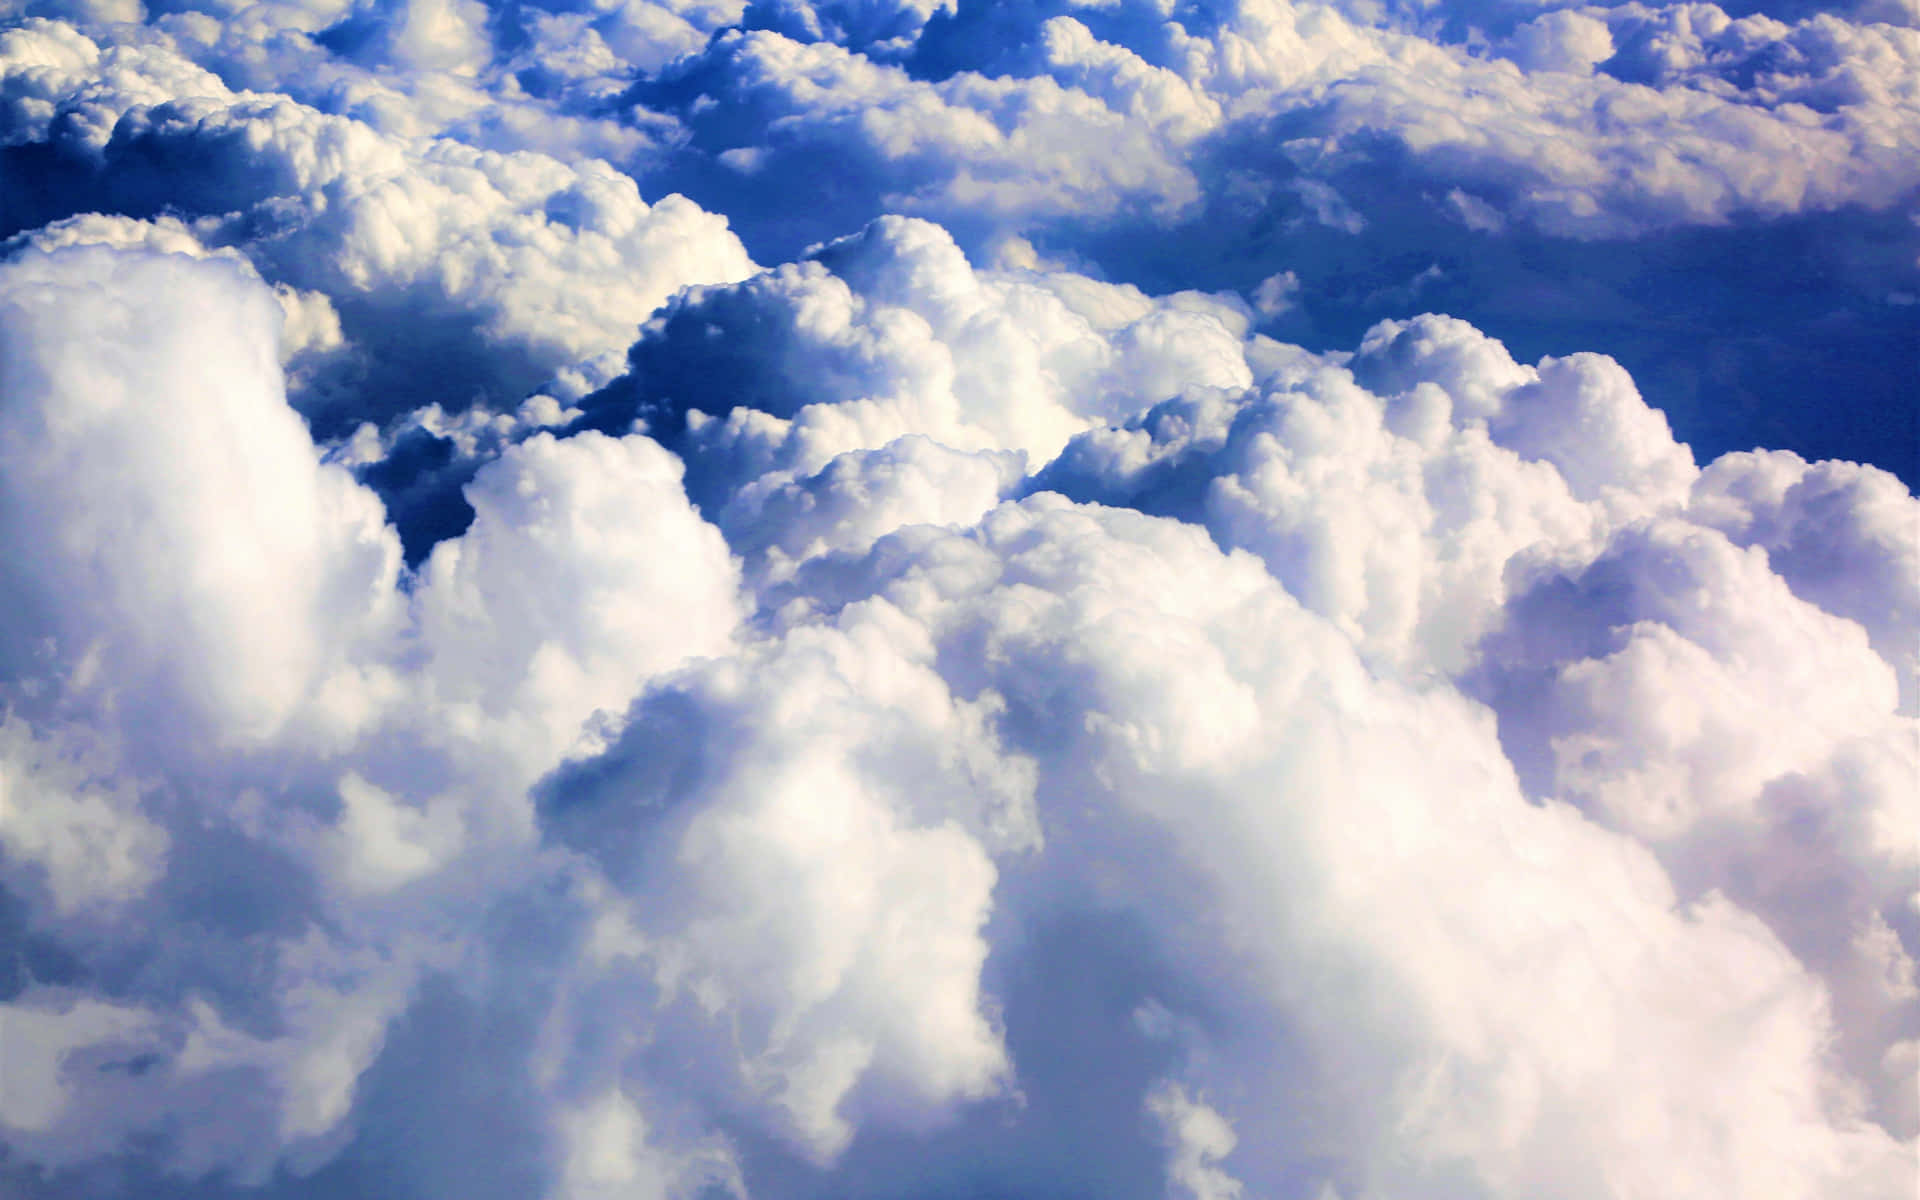 A majestic aerial view of fluffy clouds in a vibrant blue sky. Wallpaper